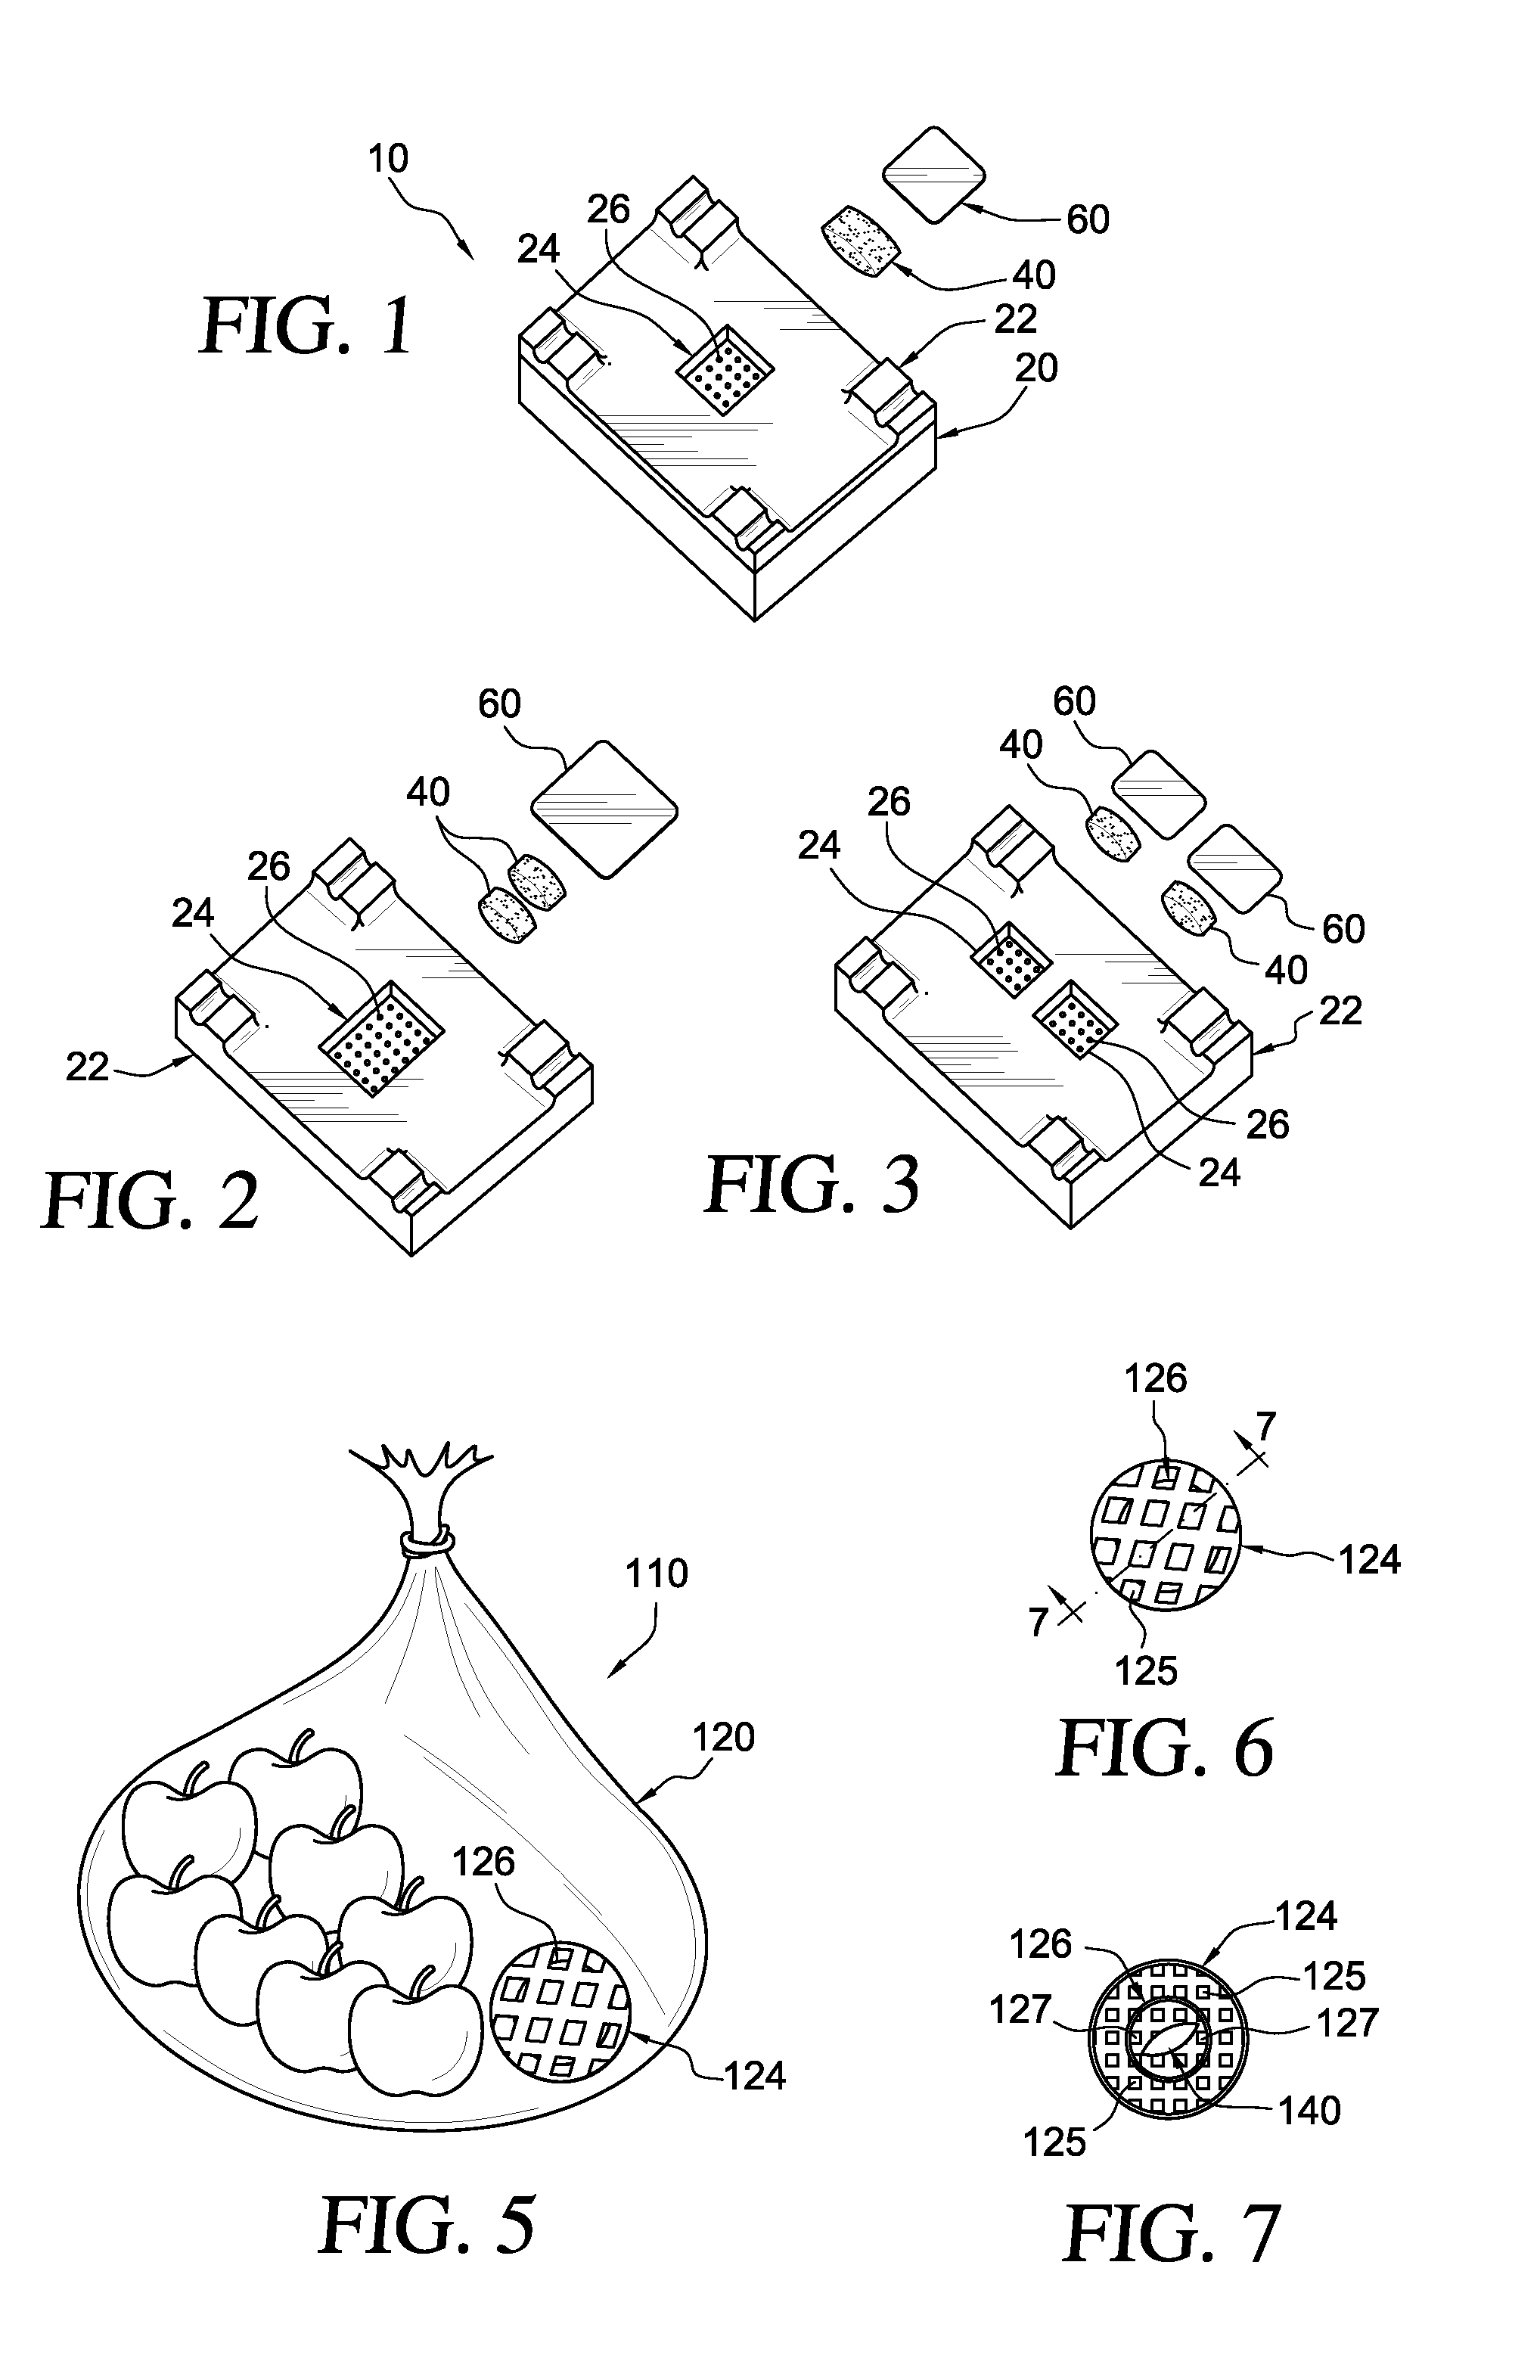 Treatment of Modified Atmosphere Packaging